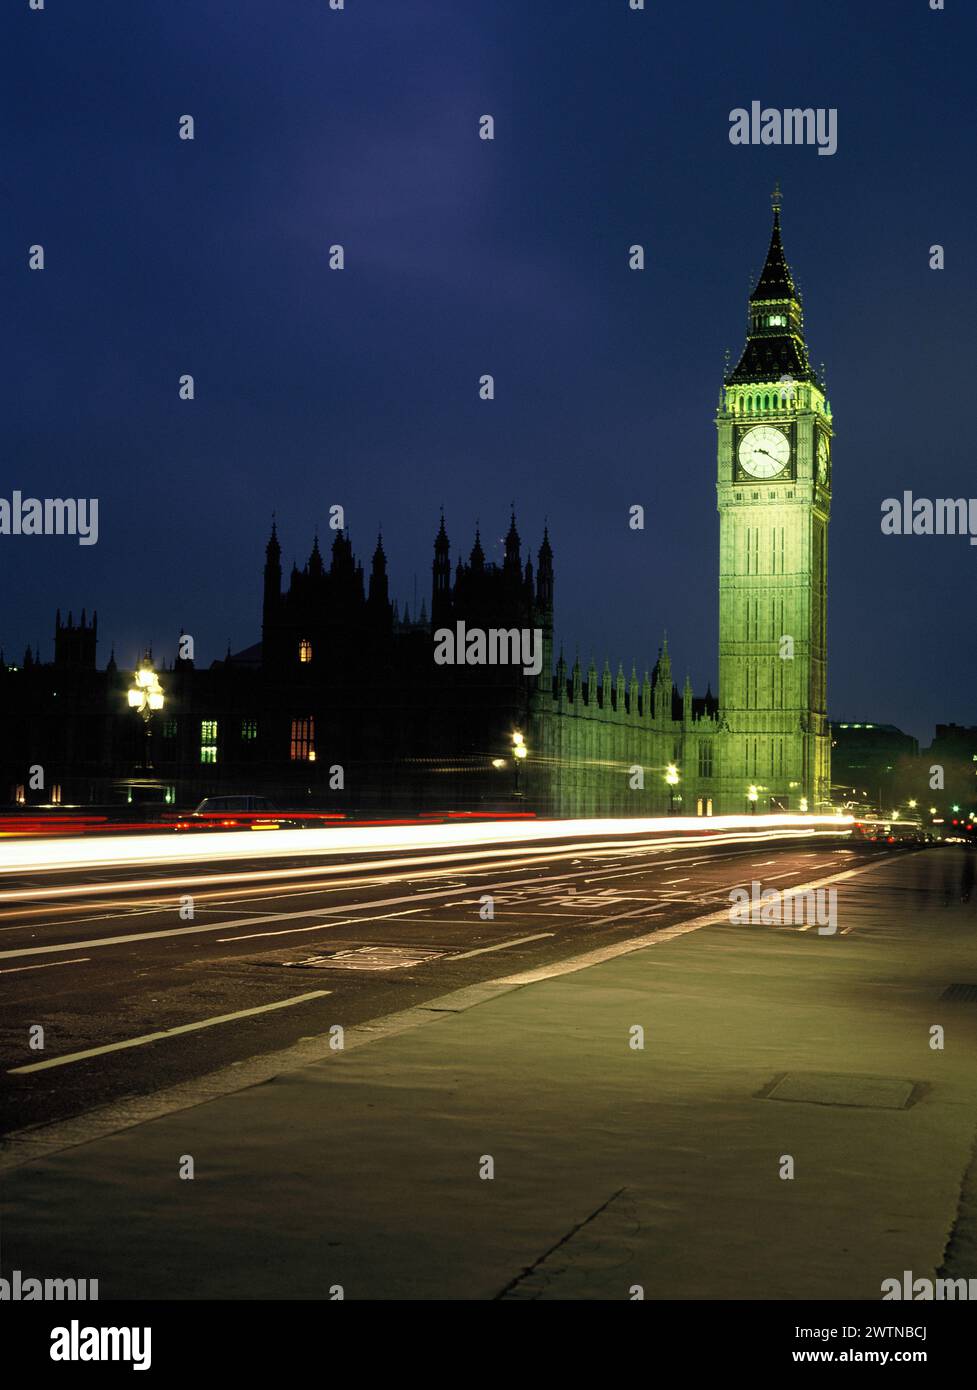 England. London. Westminster. Houses of Parliament in der Nacht. Stockfoto